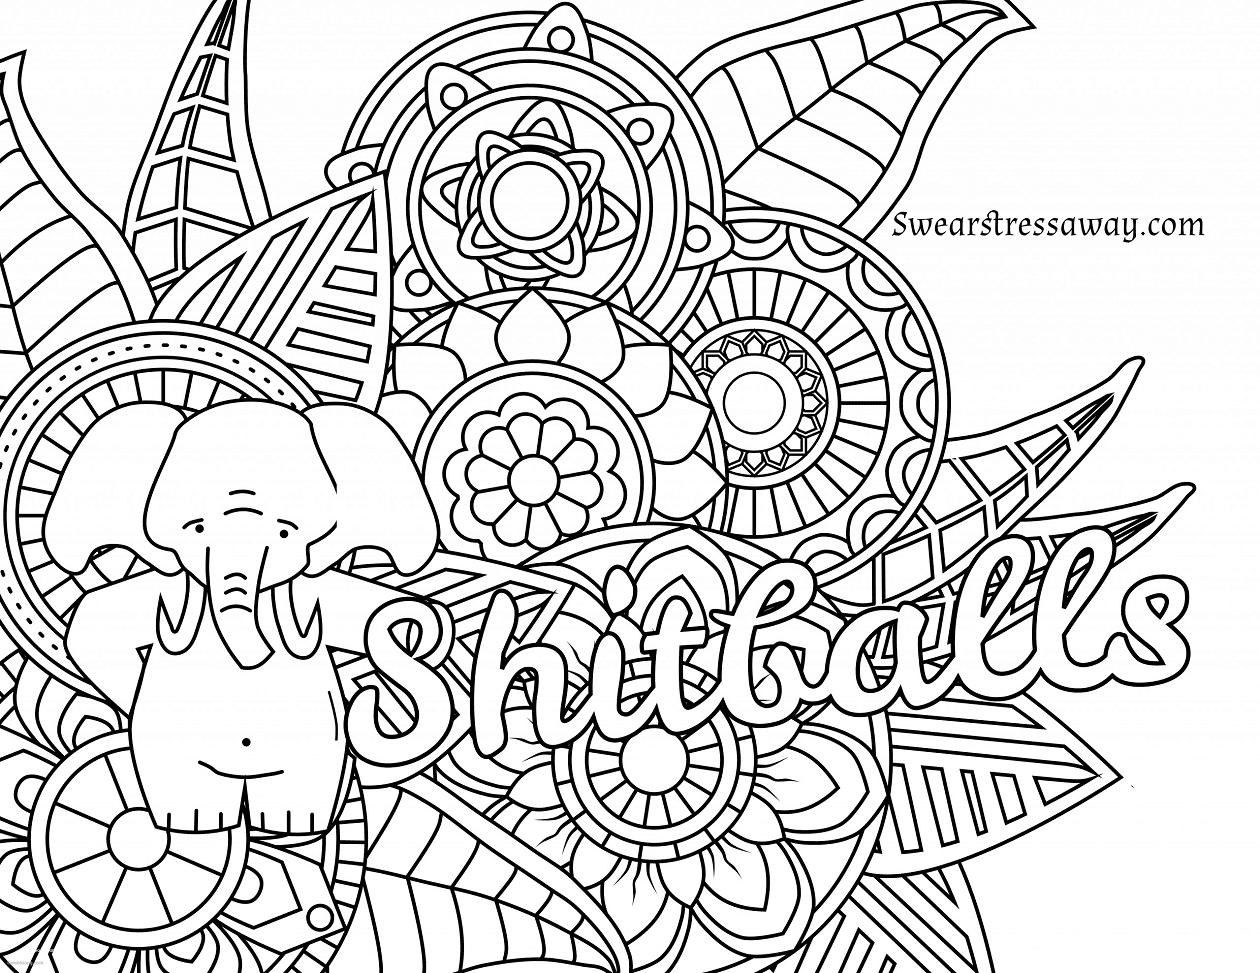 printable-swear-word-for-adult-coloring-page-free-printable-coloring